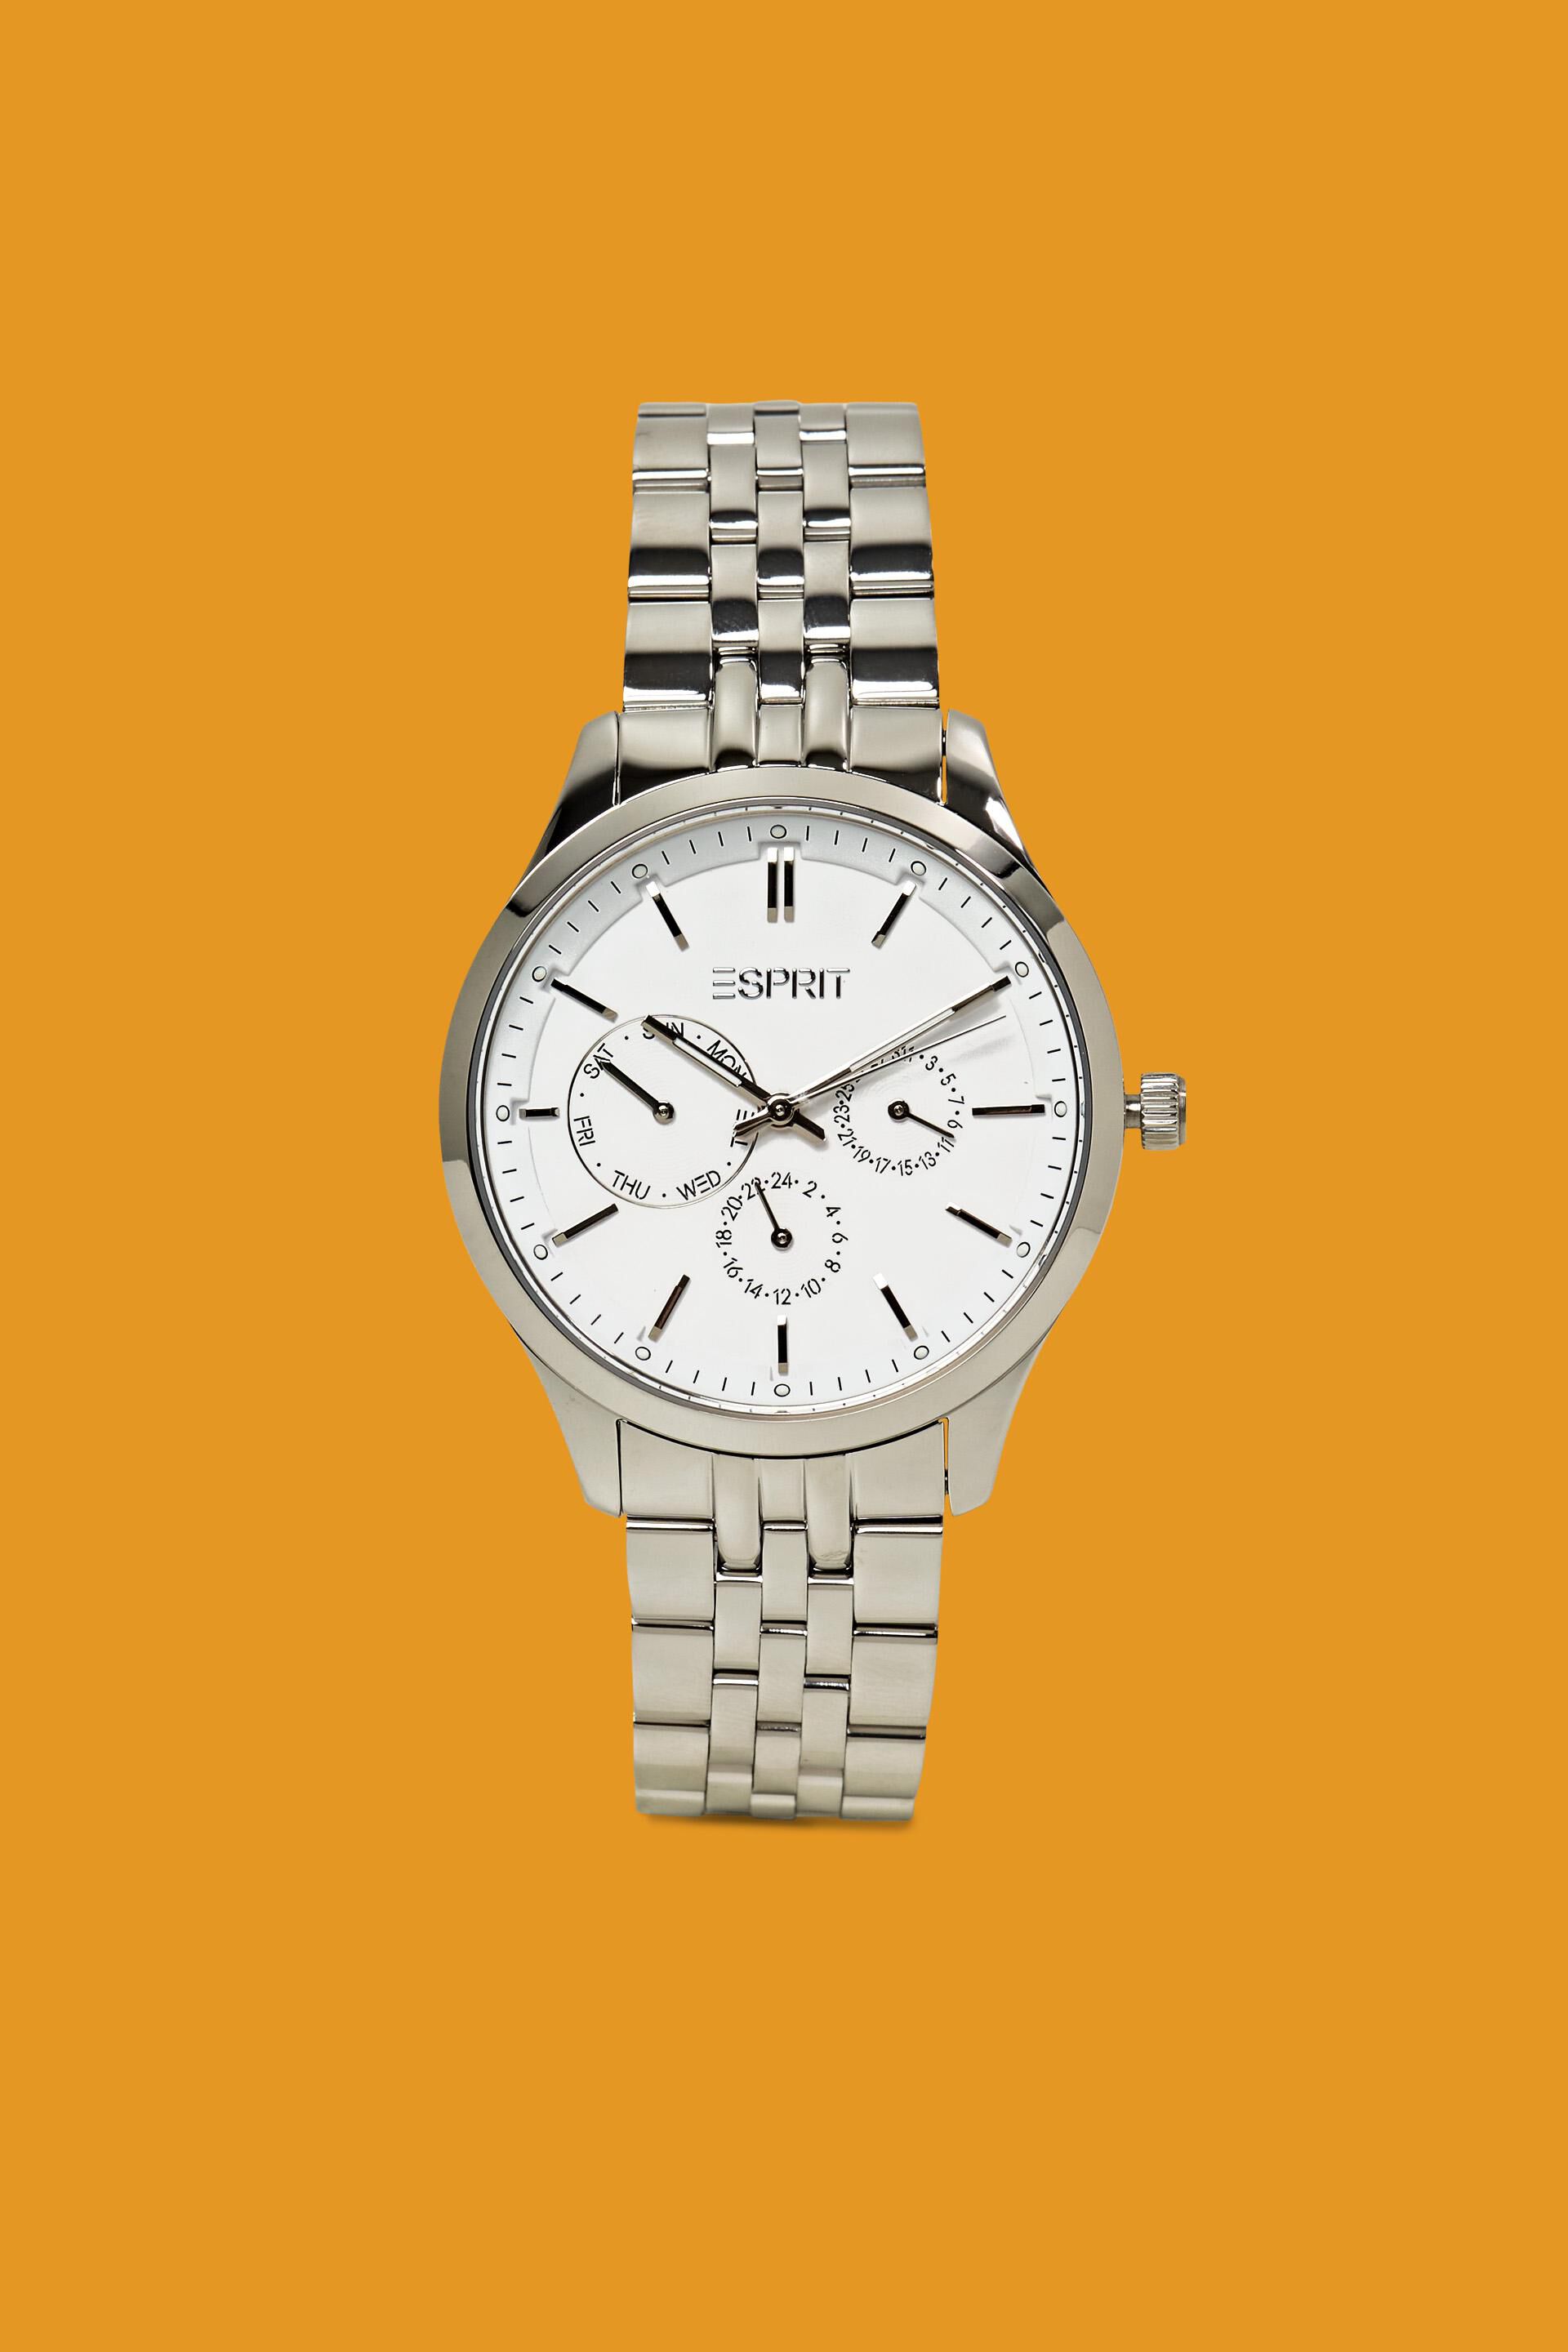 Esprit Online Store Multi-functional watch with a link bracelet